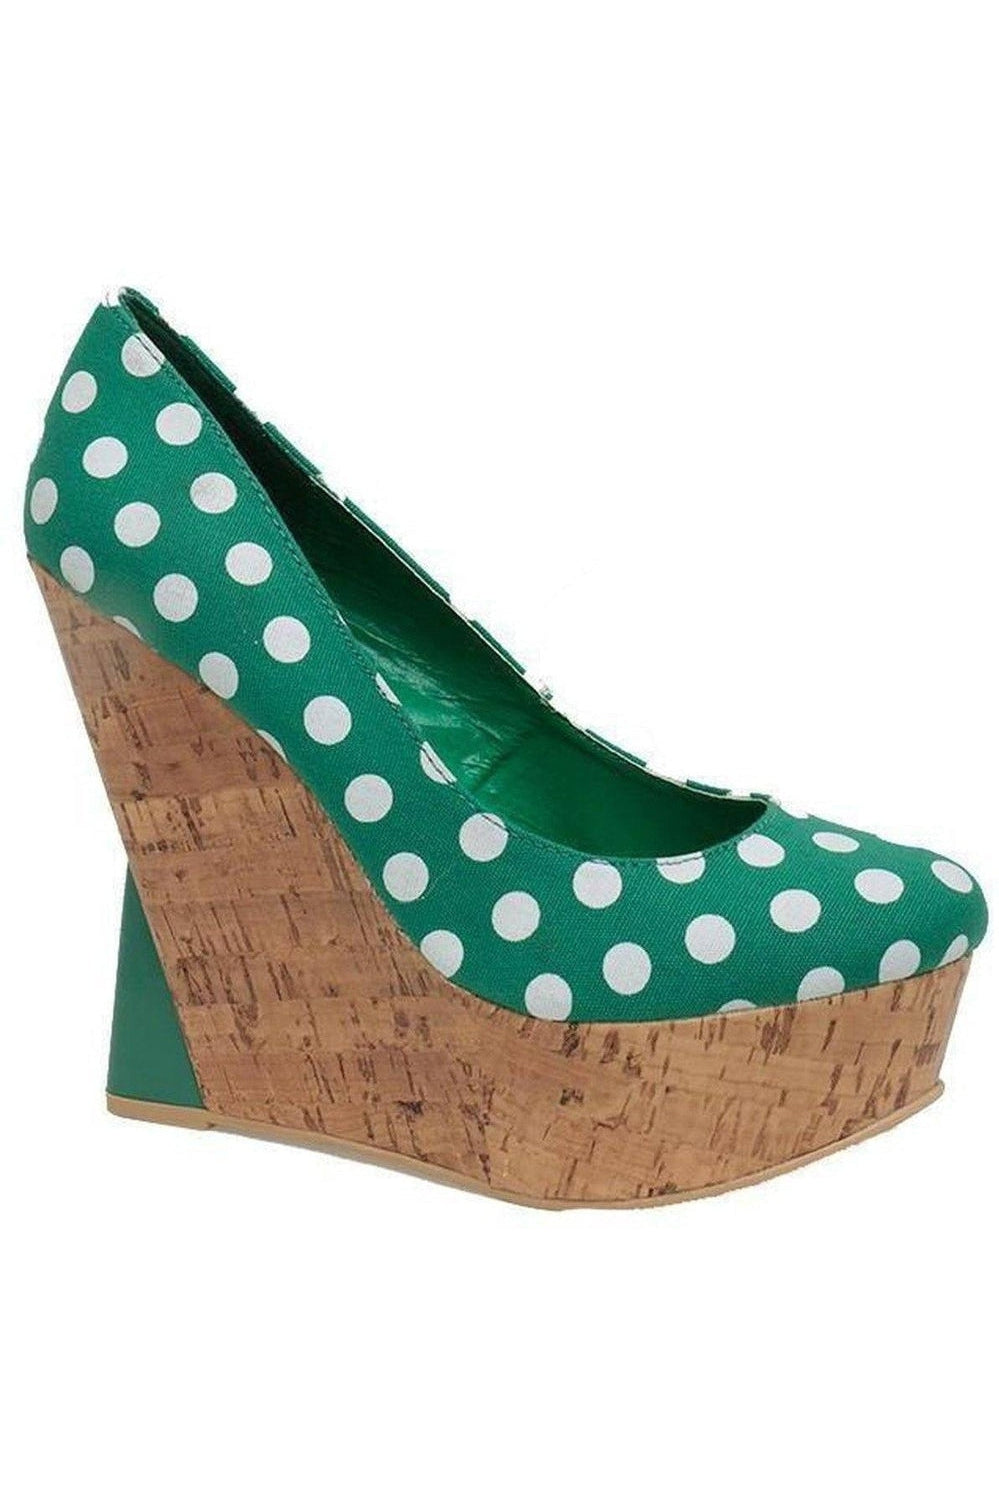 Connect The Dots-Green-Sexyshoes Brand-Green-Wedges-SEXYSHOES.COM